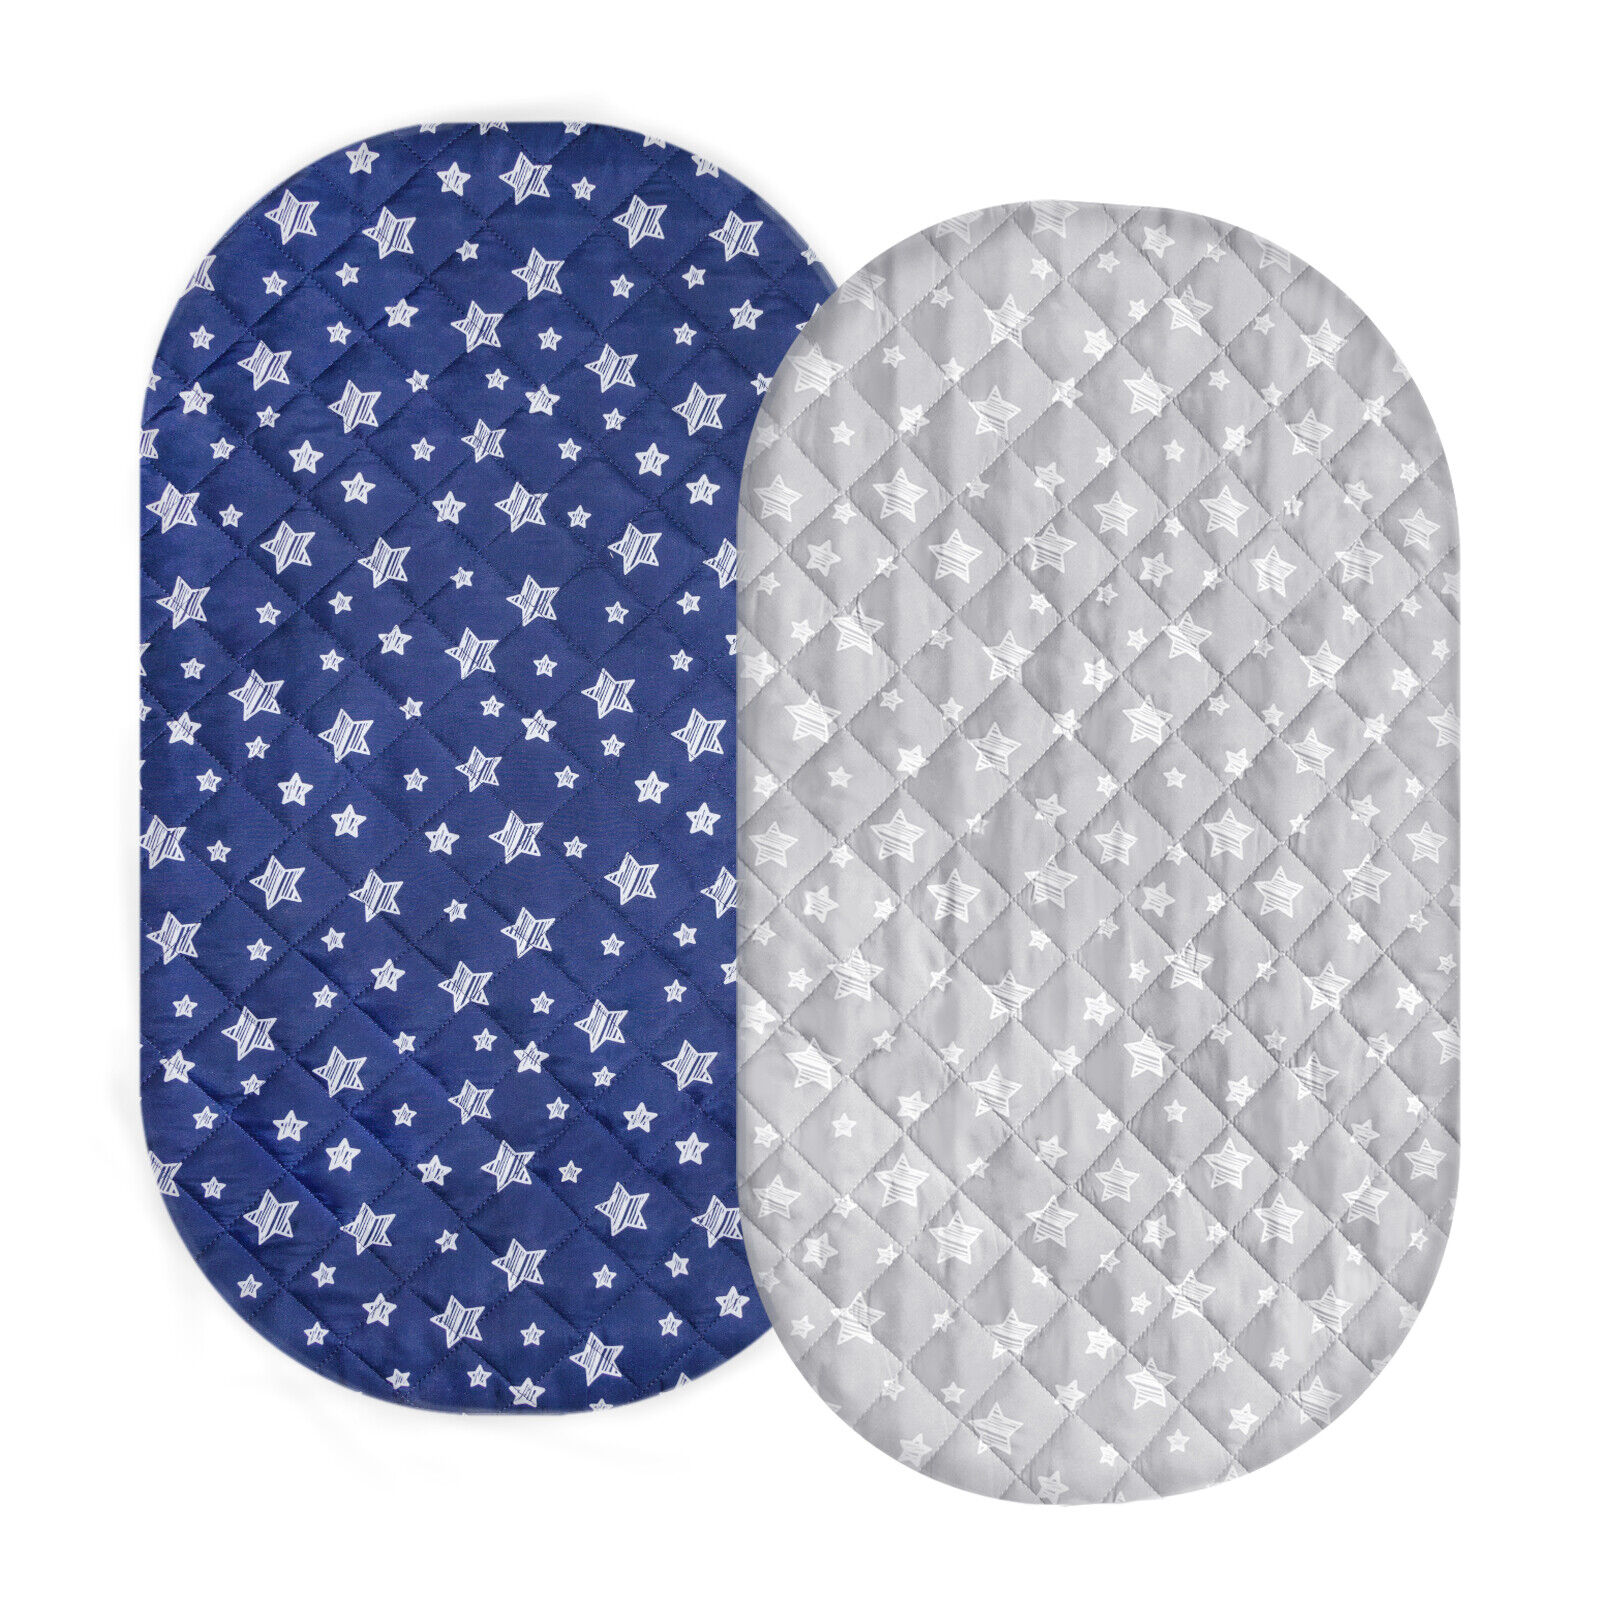 Bassinet Mattress Pad Cover Waterproof Soft Fits For Different Cradle 2 Pack